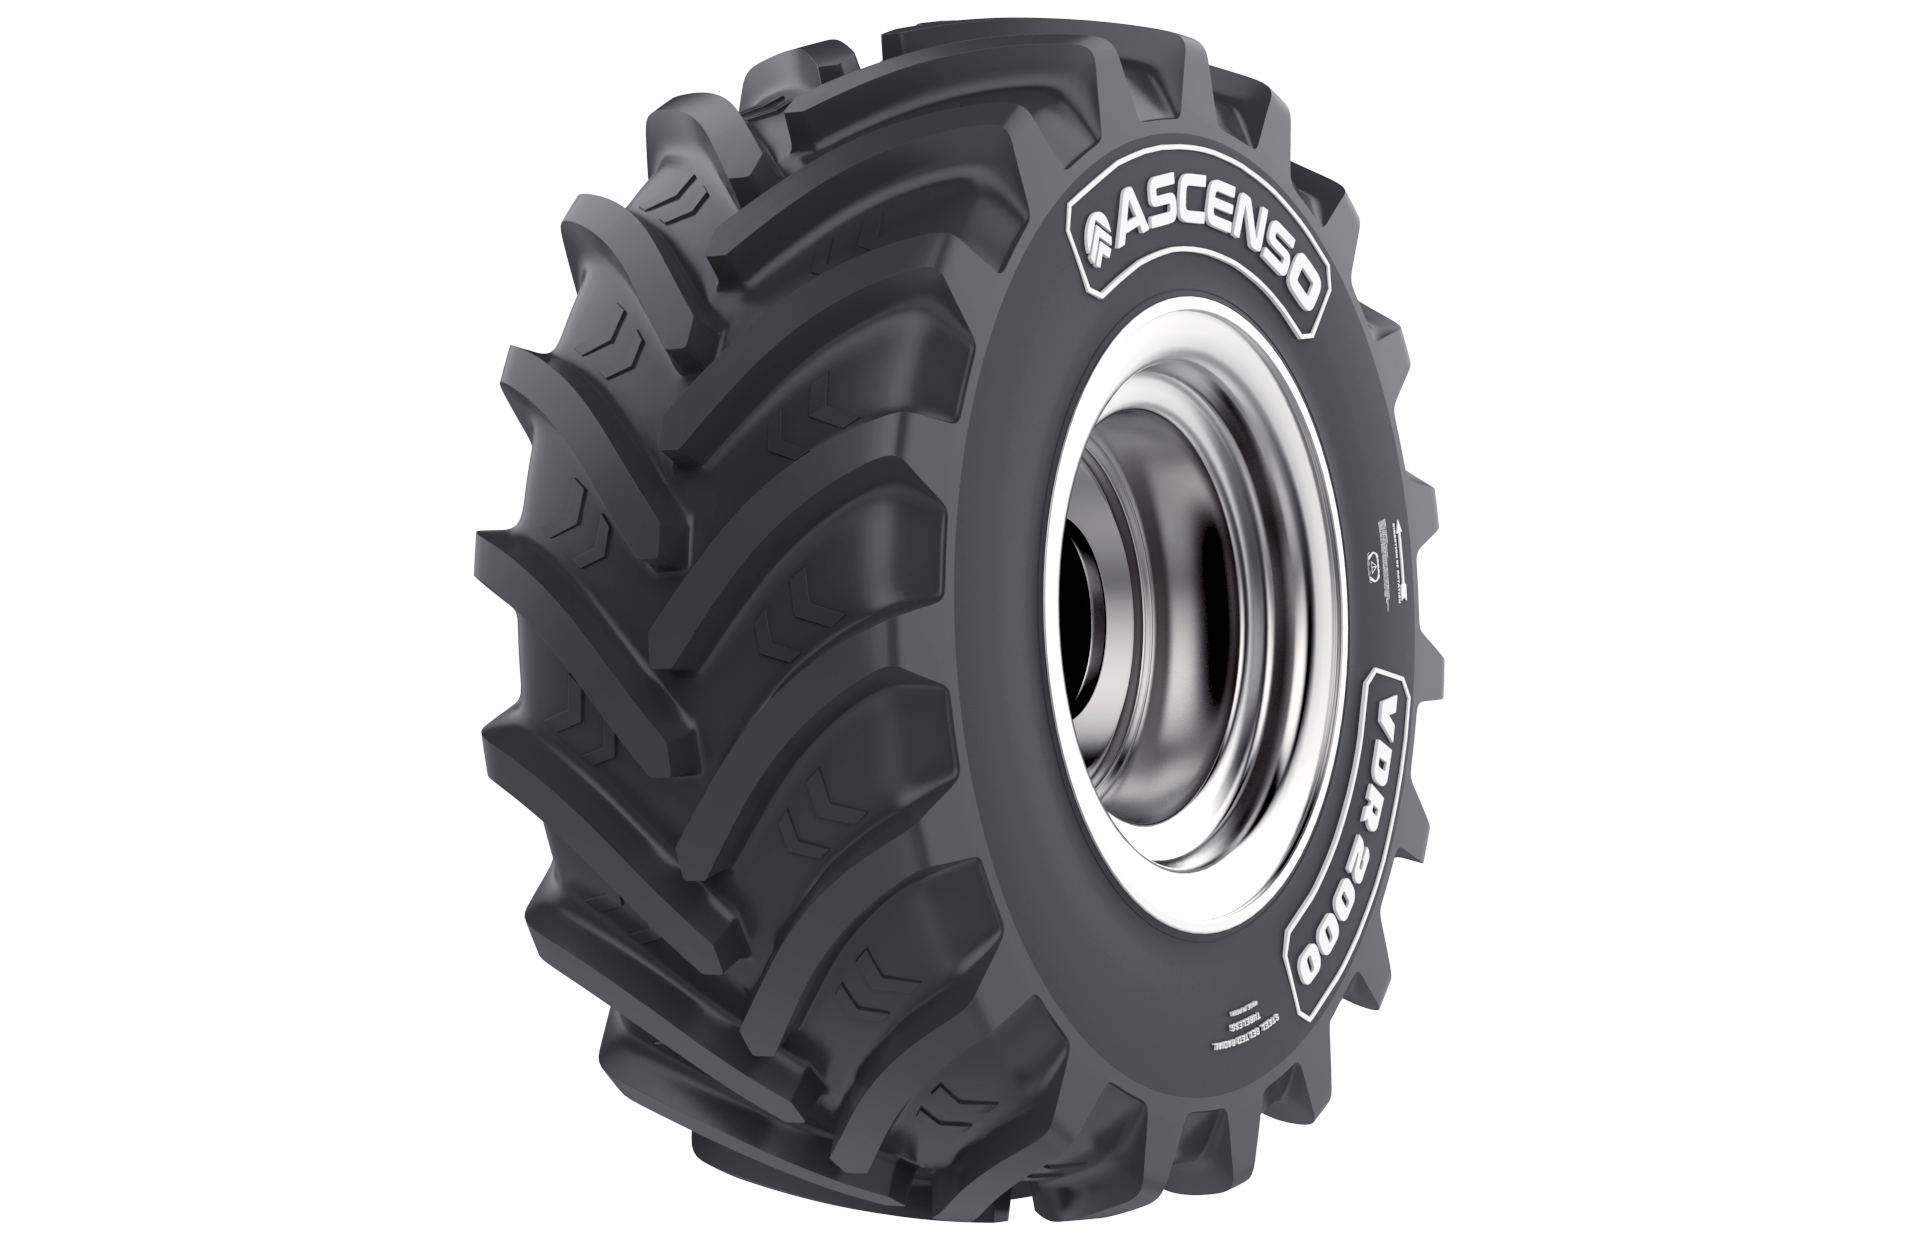 ASCENSO VF 600/60R30 NRO 162D R1-W TL VDR2000 STEEL BELTED